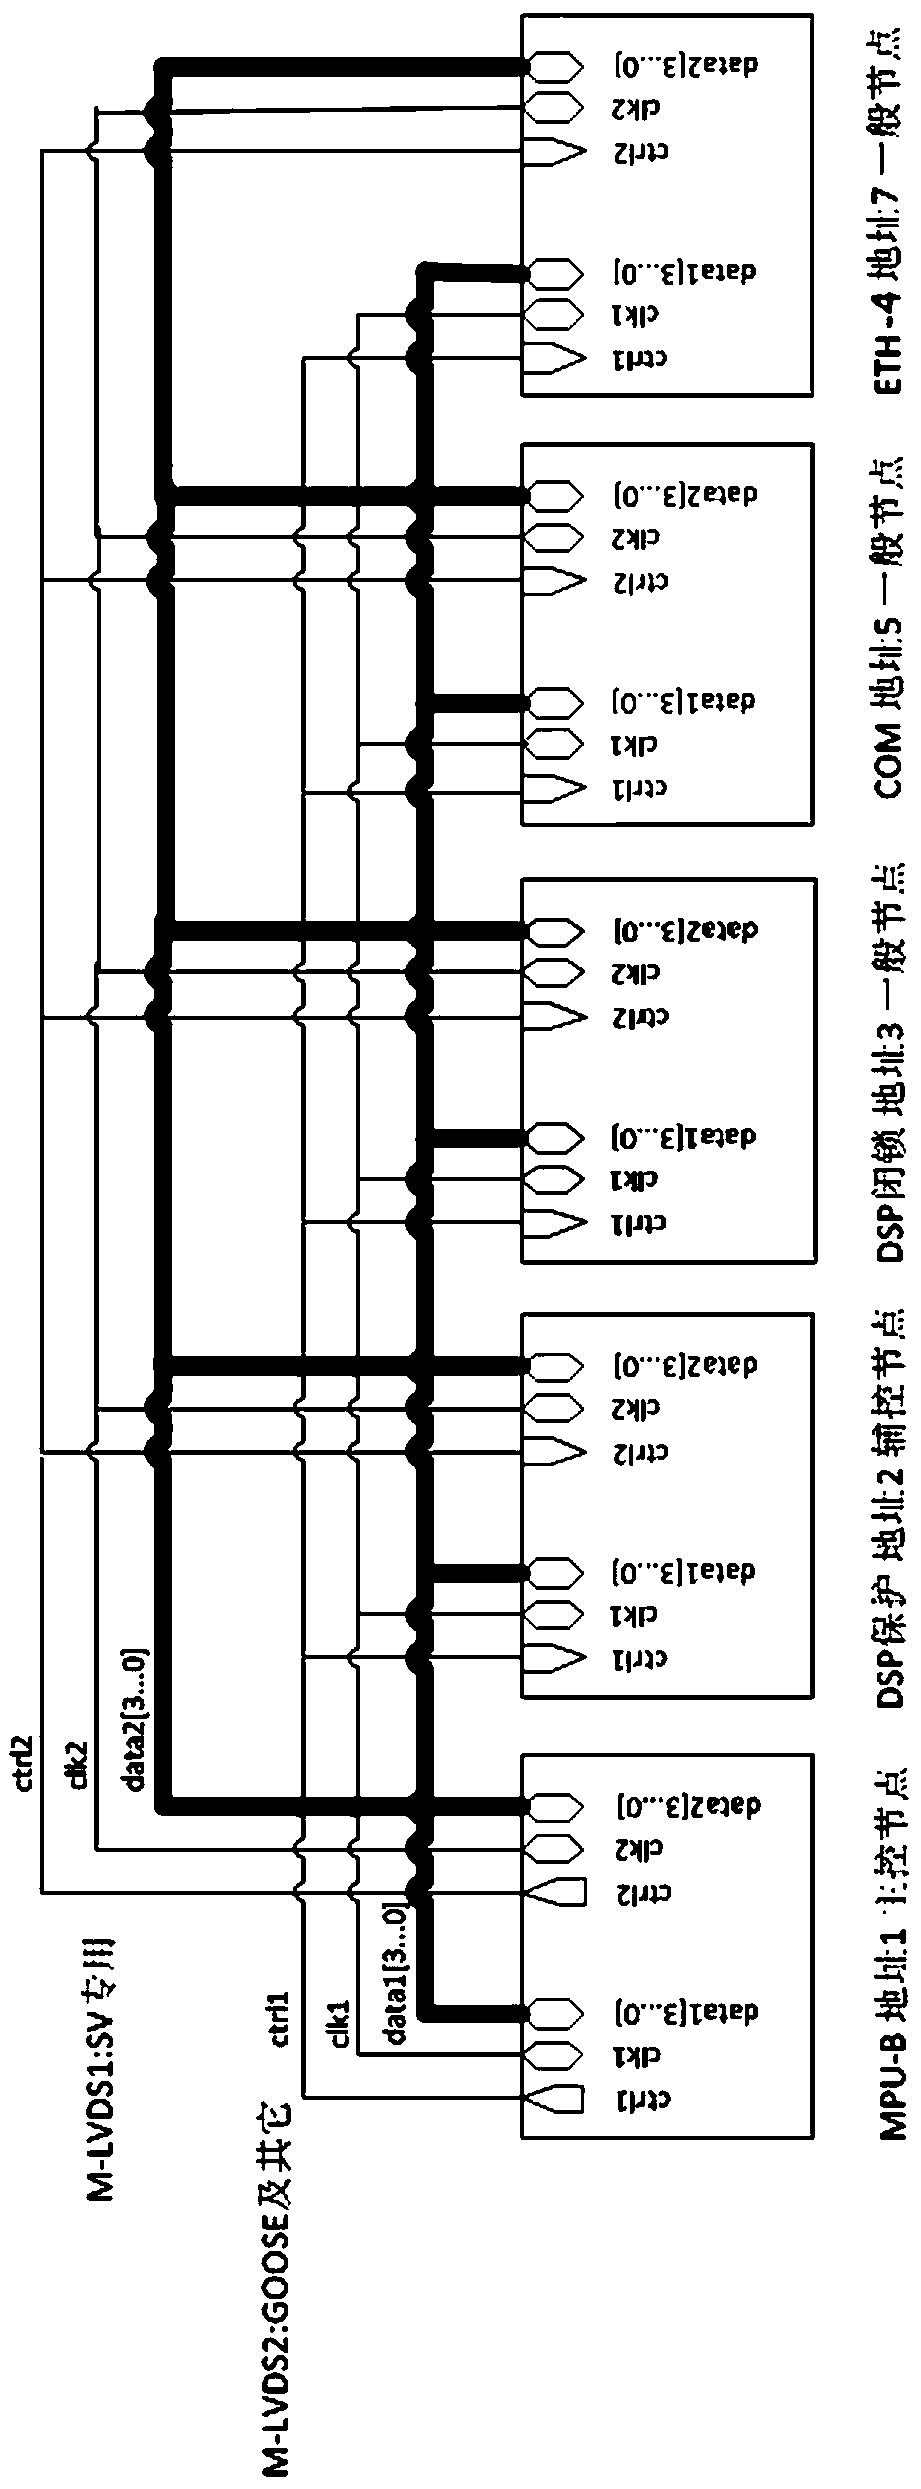 A real-time and efficient data transmission method based on m-lvds bus